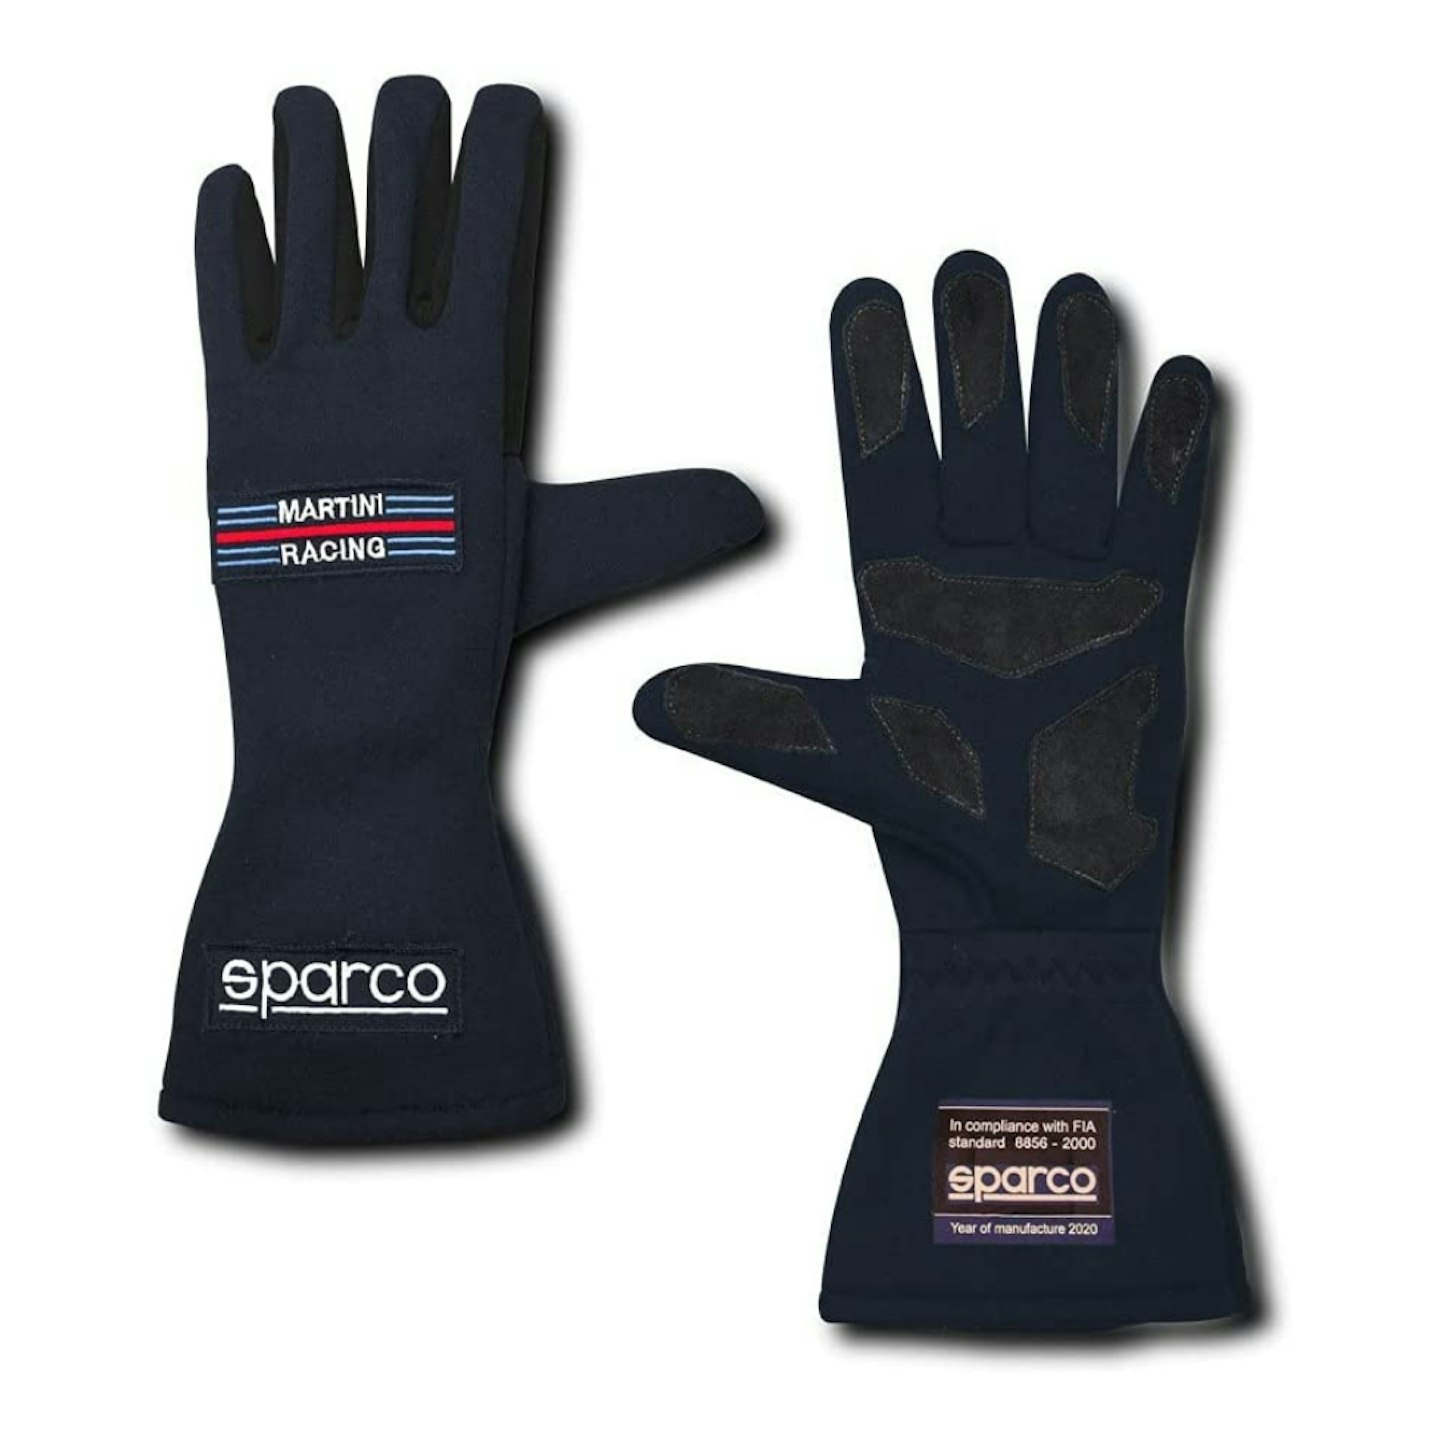 Sparco Classic Martini driving gloves for track days